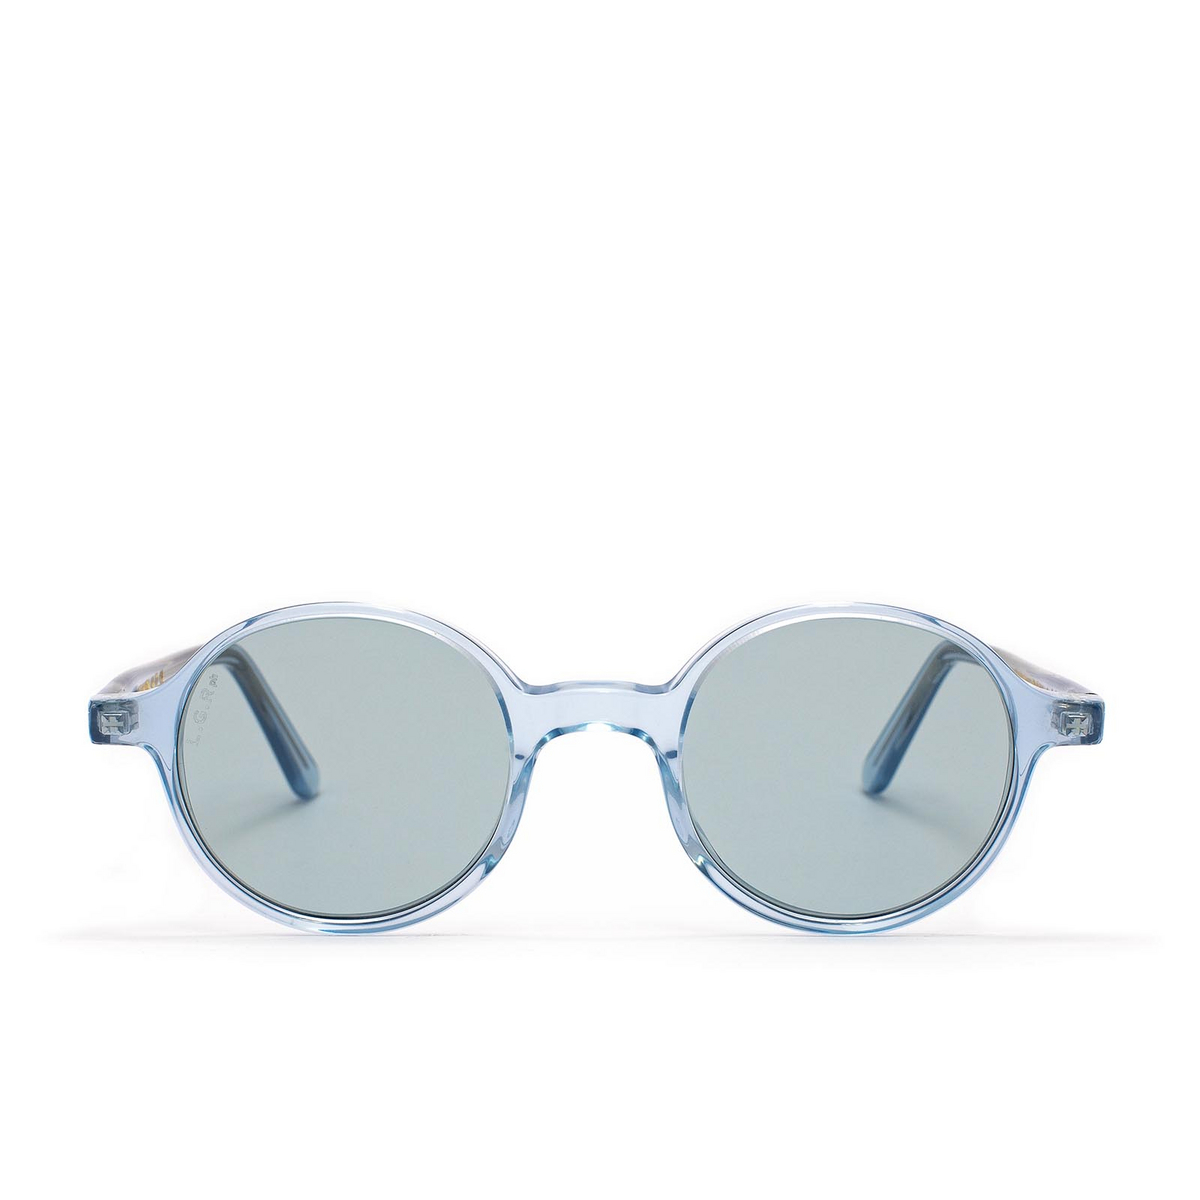 L.G.R REUNION Sunglasses 72 Crystal Blue - front view